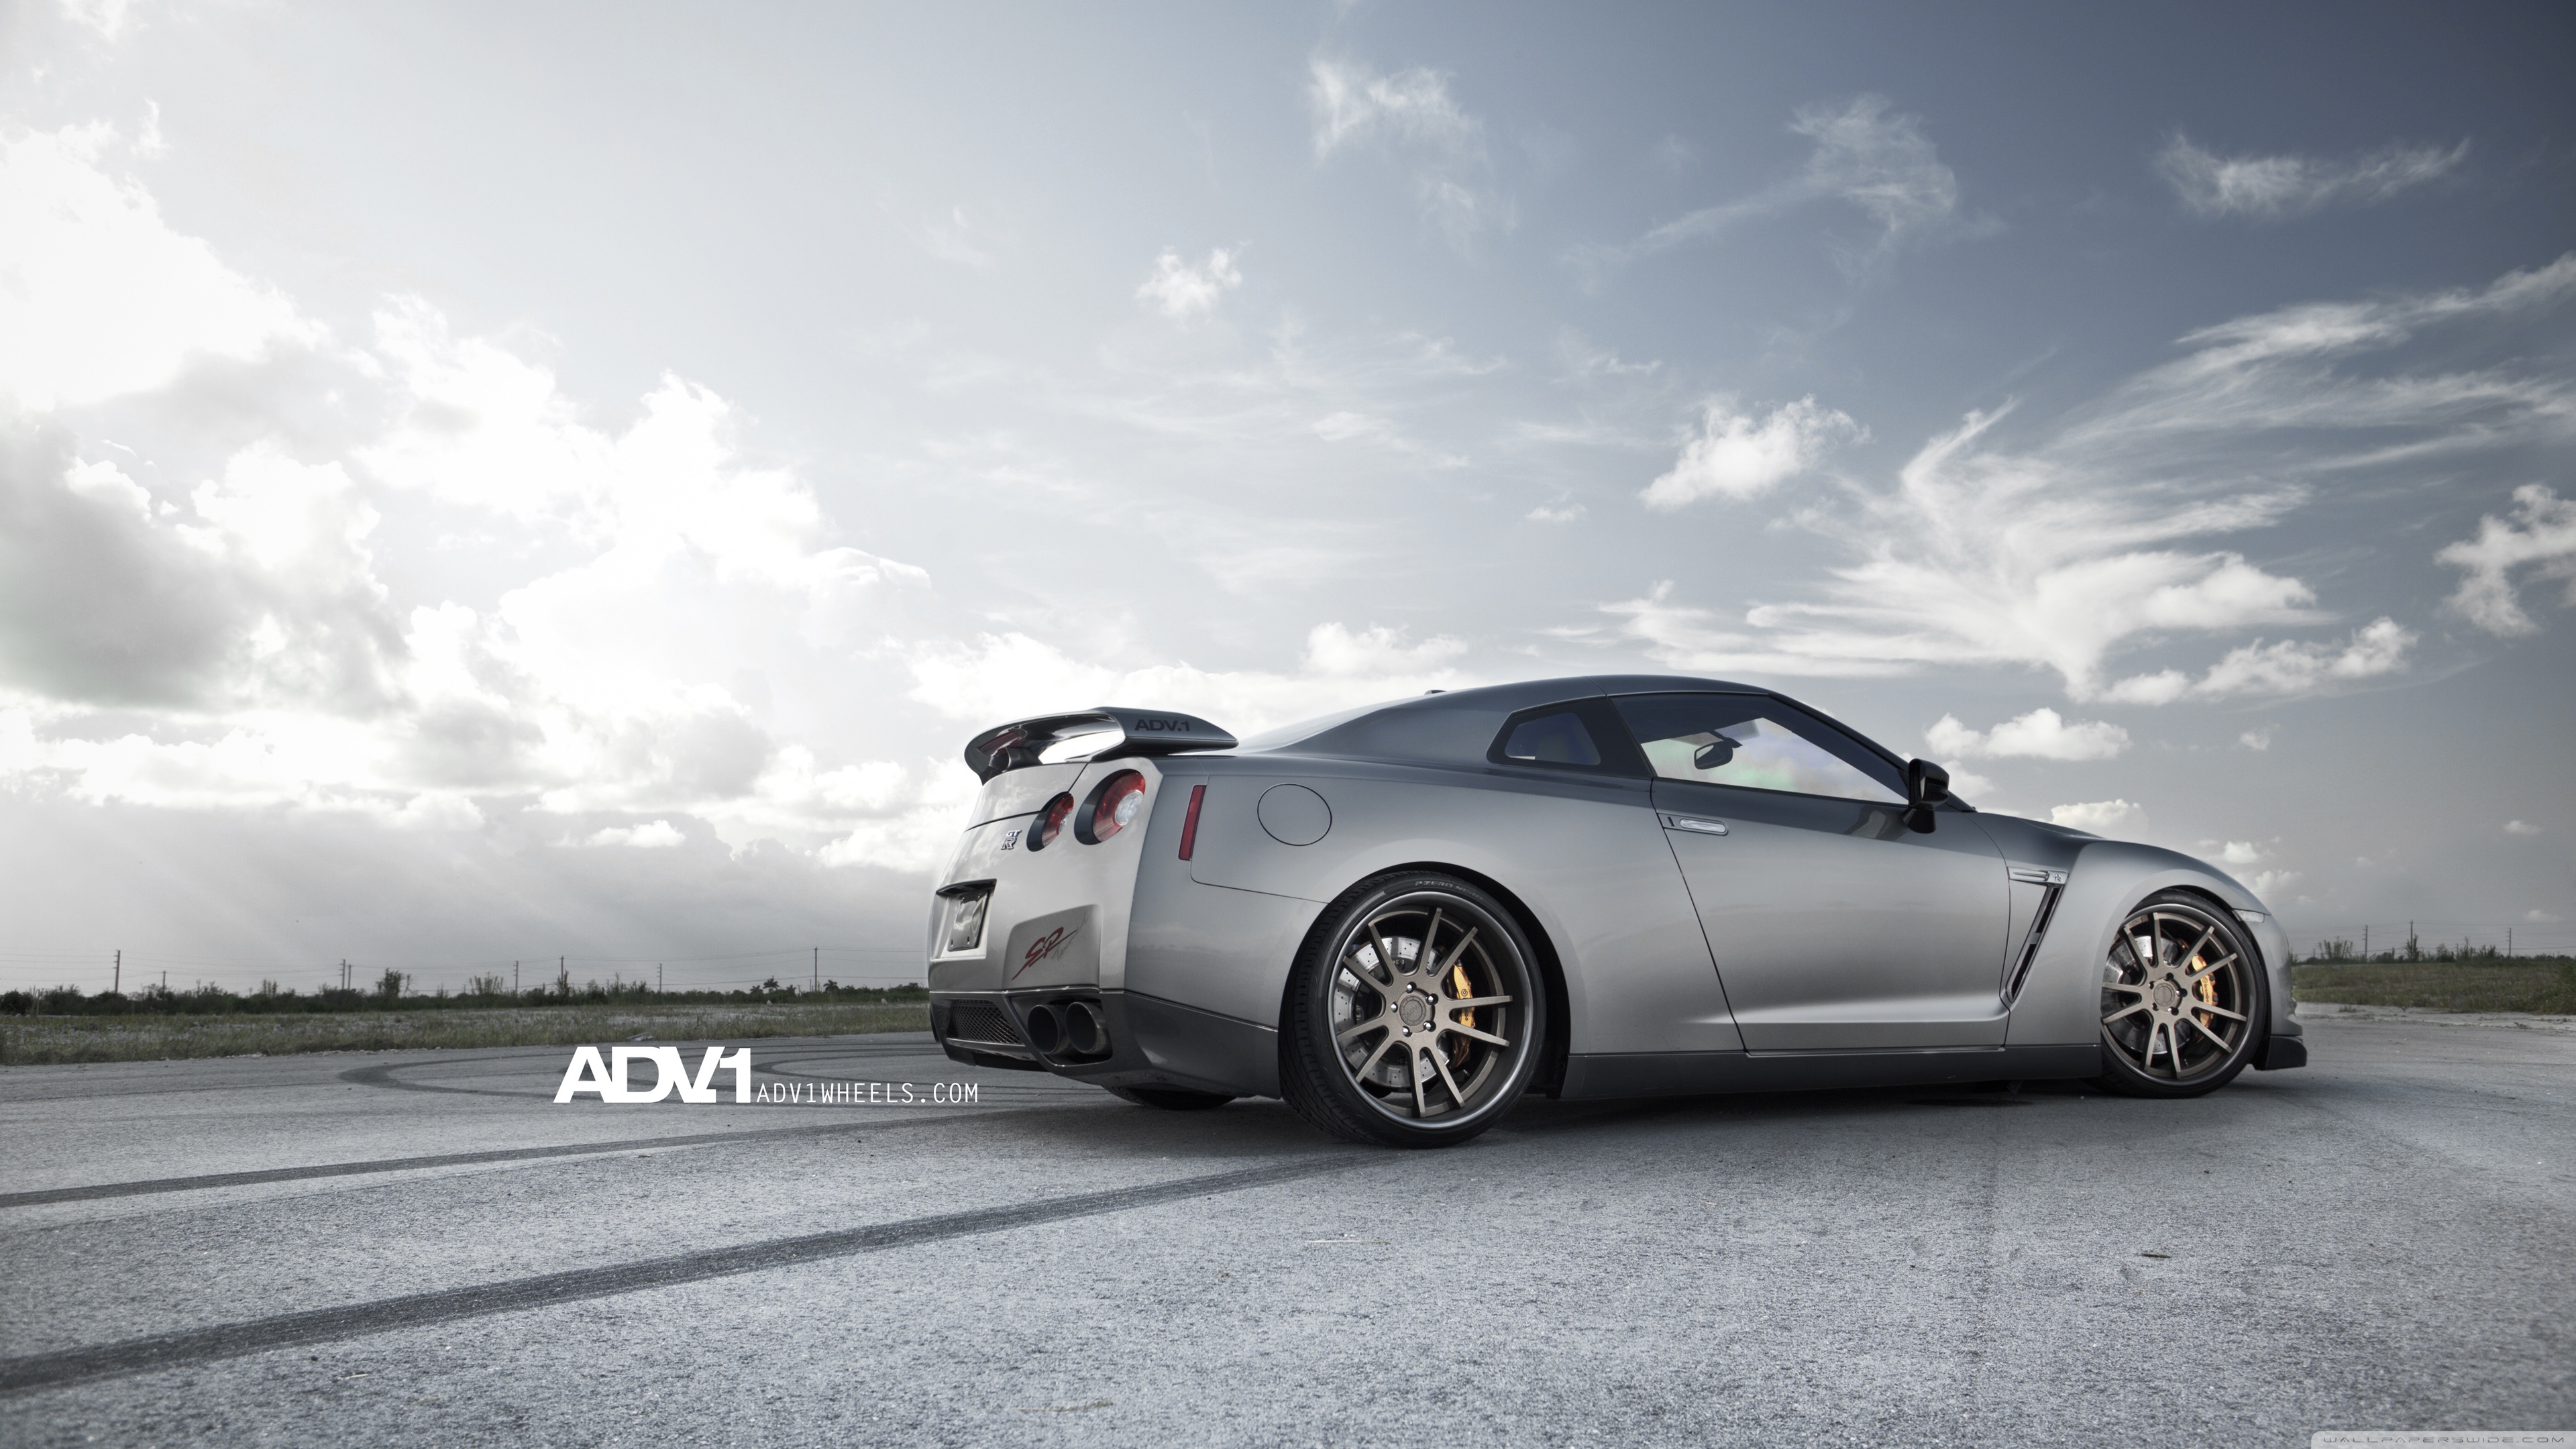 ADV.1 Nissan GTR R35 2 Ultra HD Desktop Backgrounds Wallpapers for : Multi Display, Dual Monitor : Tablet : Smartphone